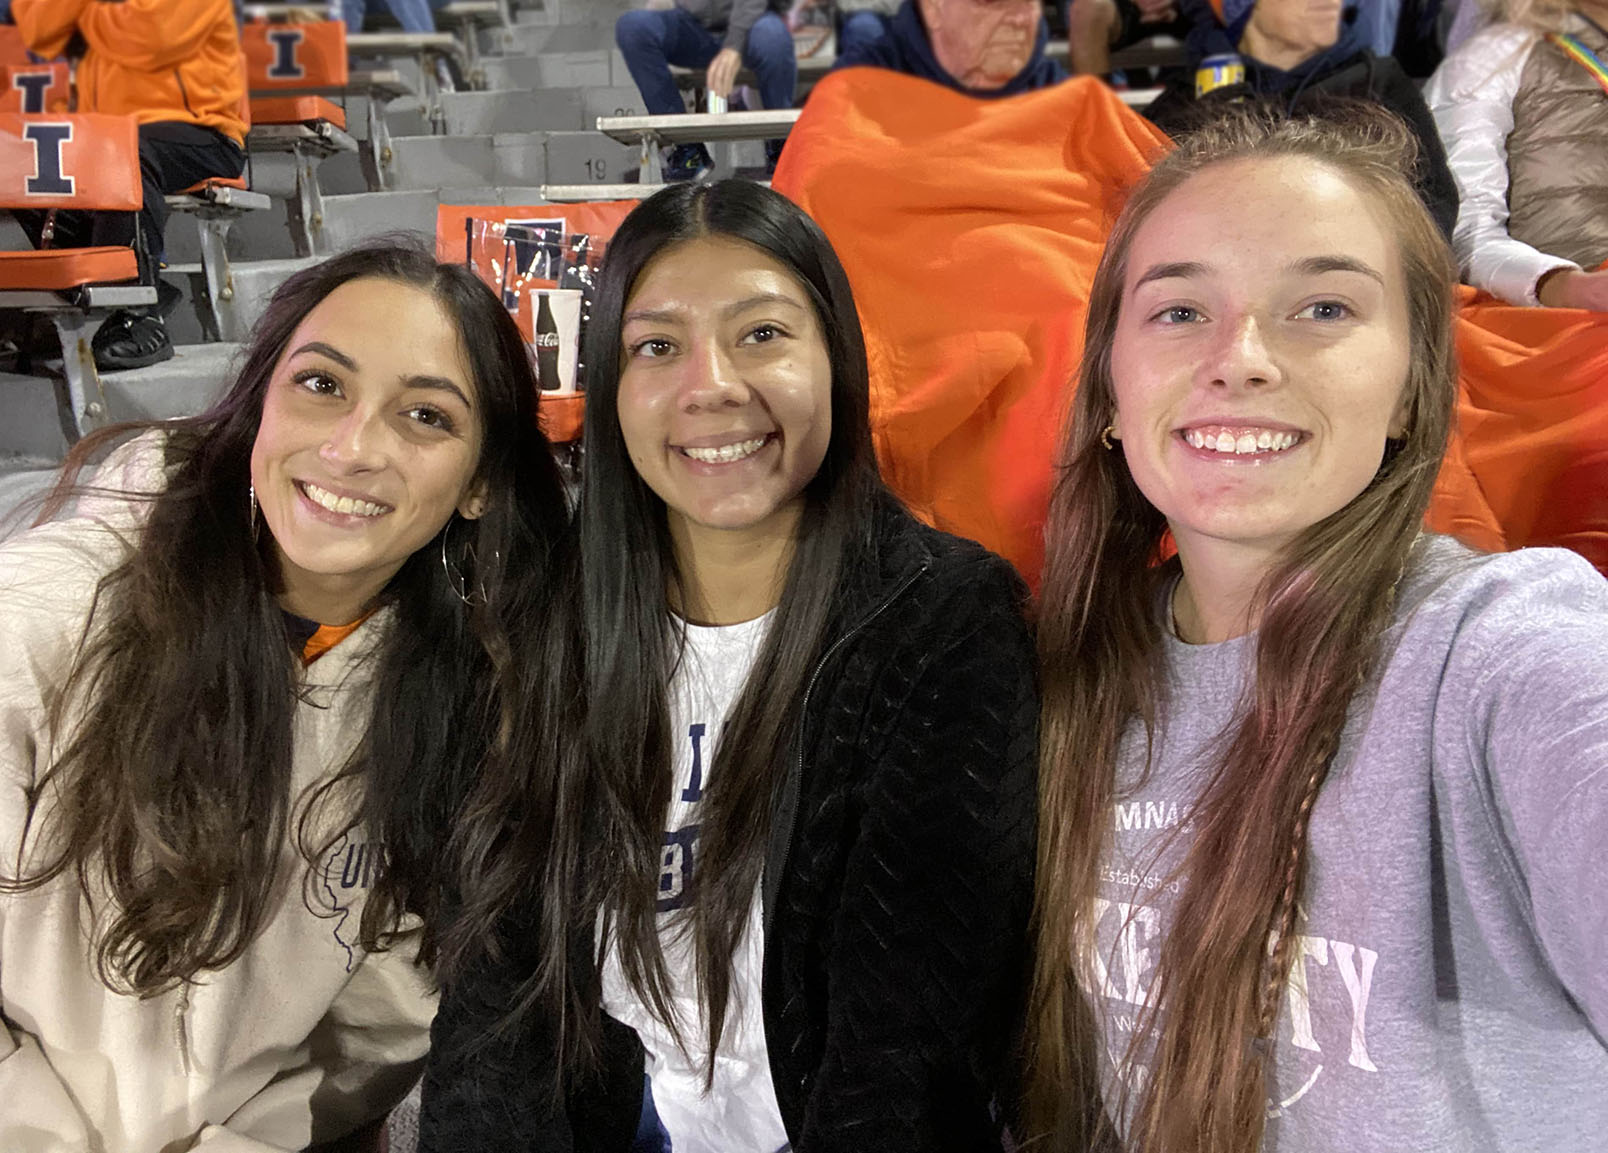 Annie Davis at Football Game with friends